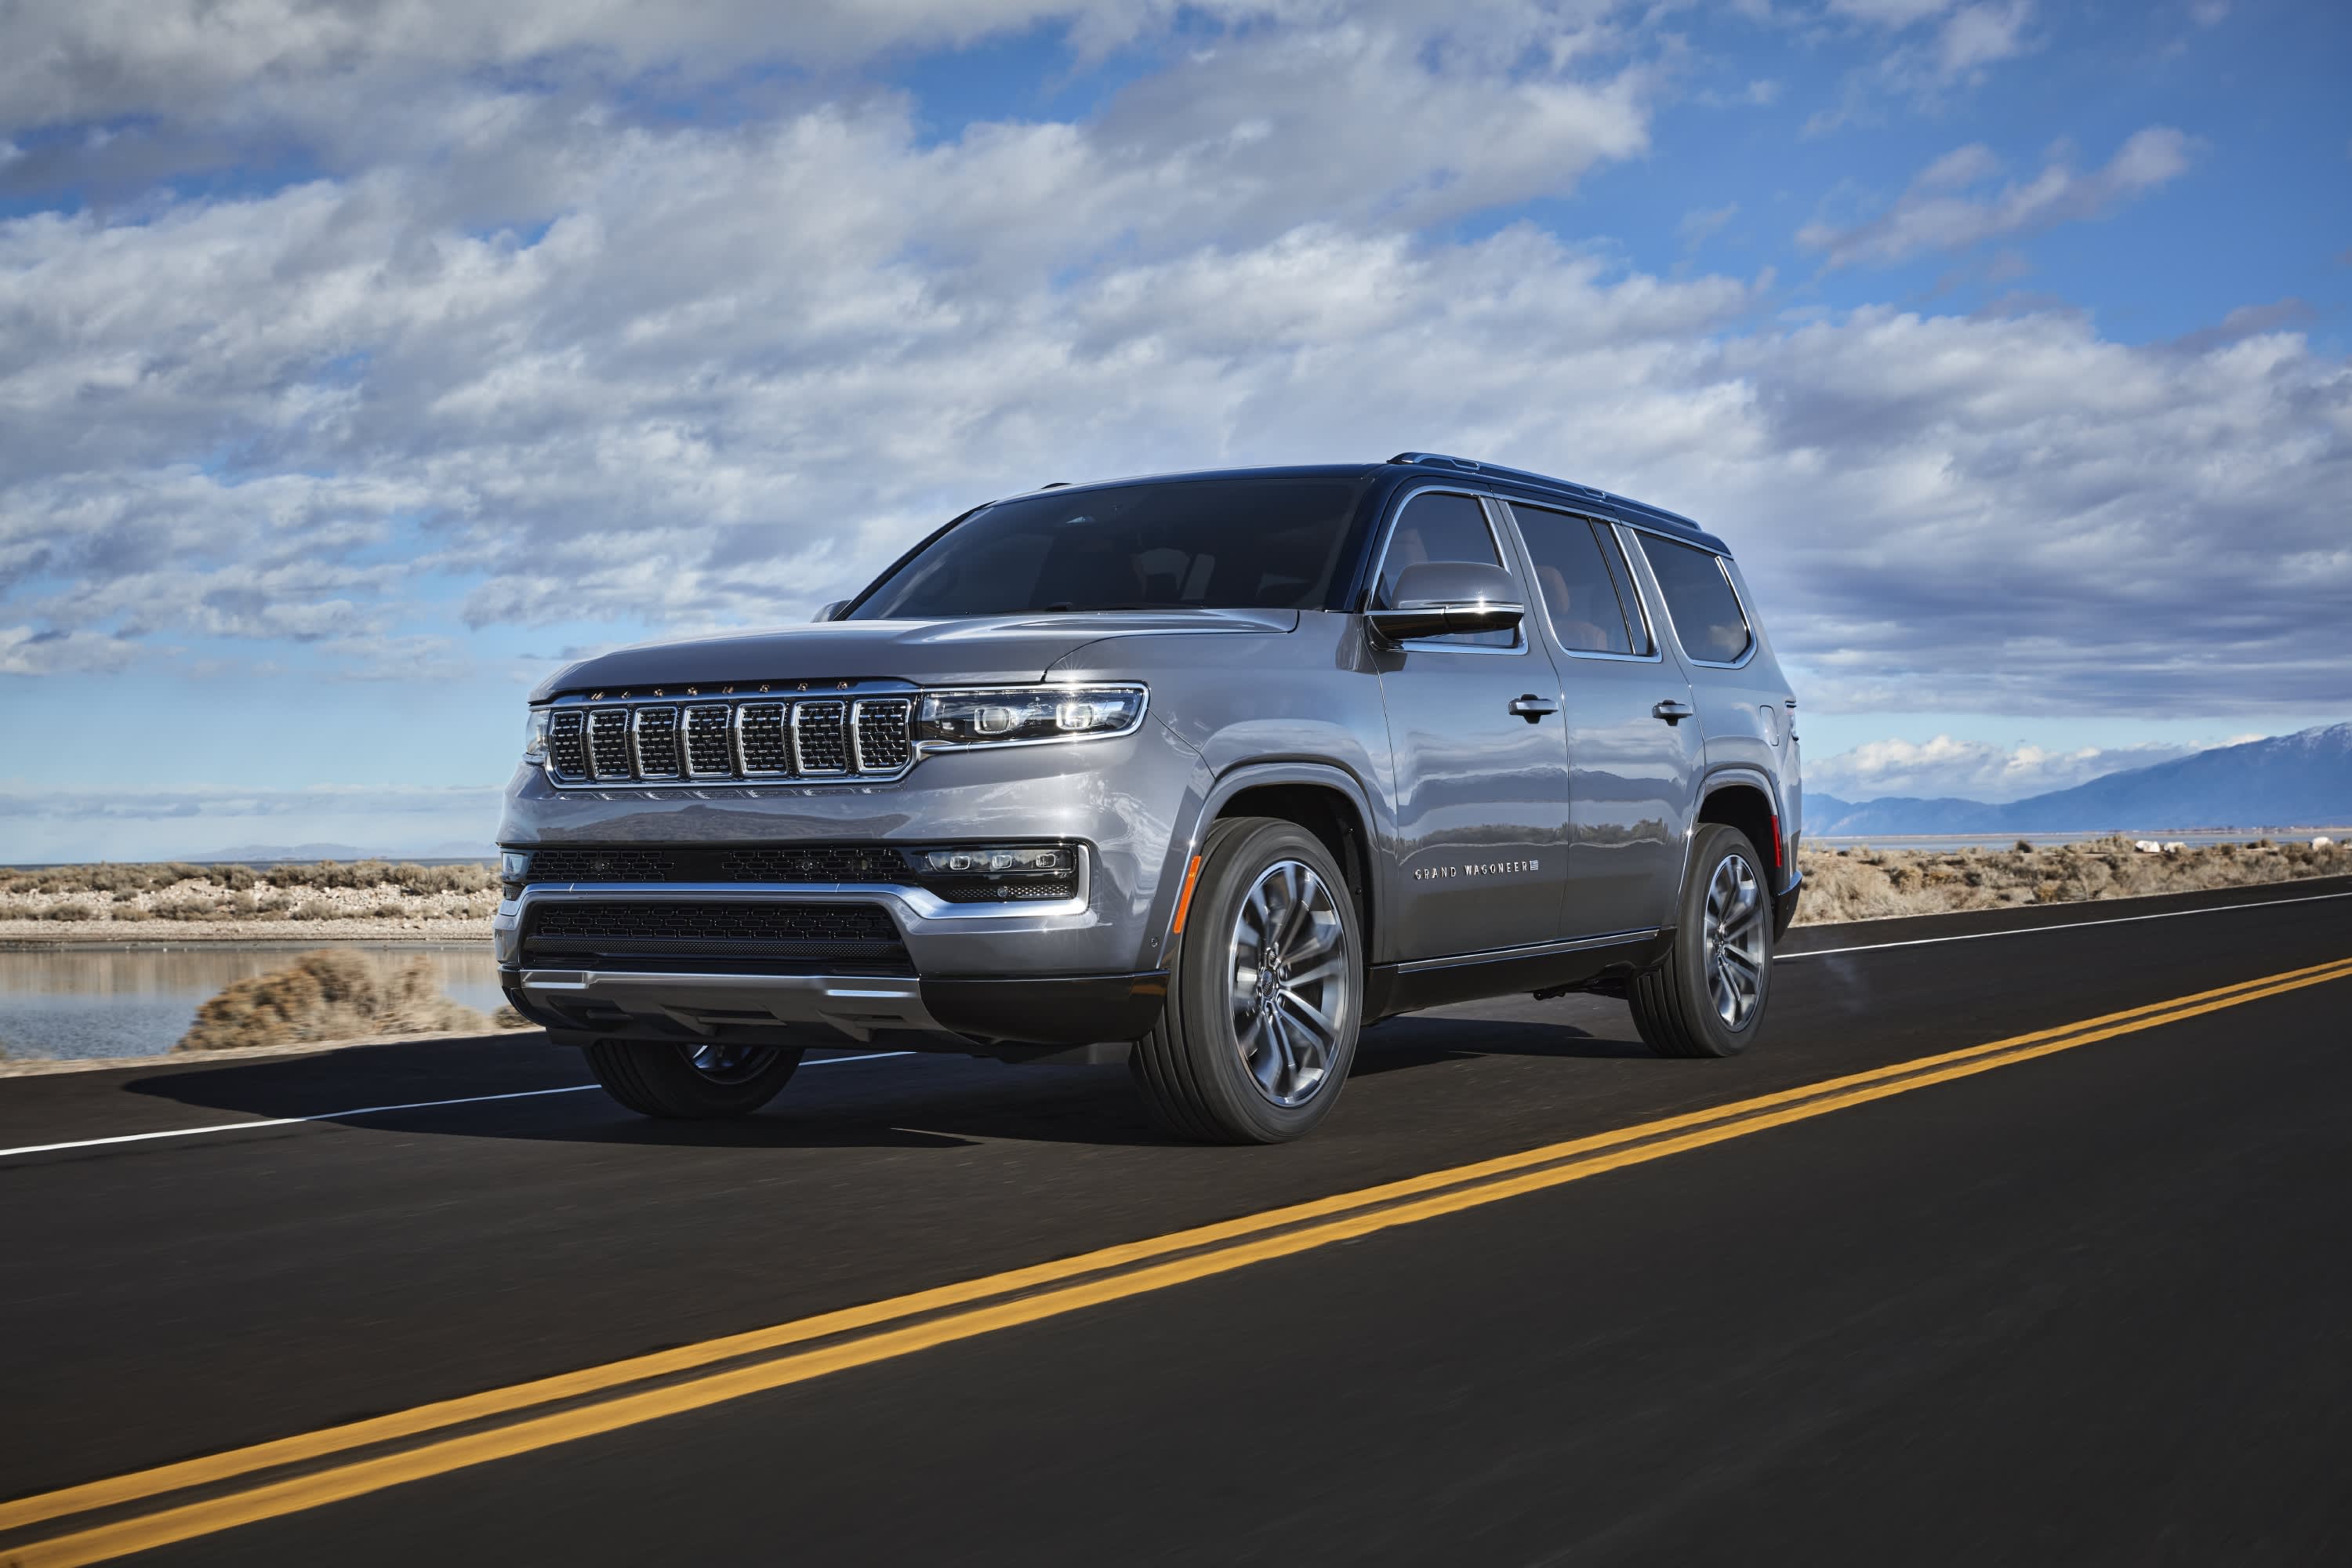 Jeep unveils longawaited Grand Wagoneer SUV topping 111,000